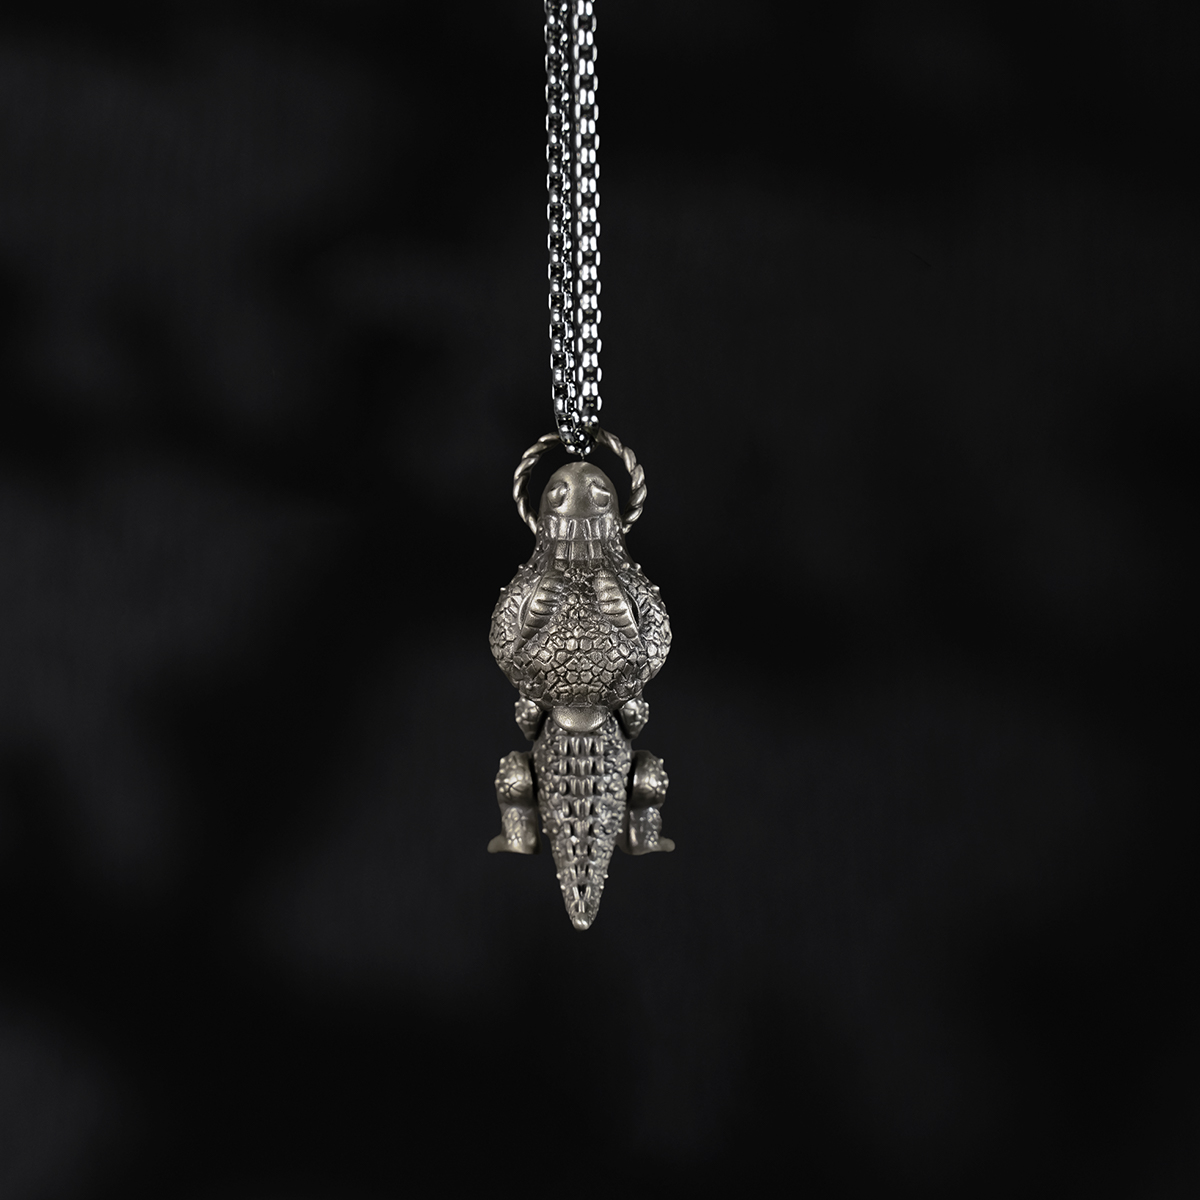 S925 Silver Artistic Crocodile Retro Pendant with Moveable Limbs and Biteable Mouth